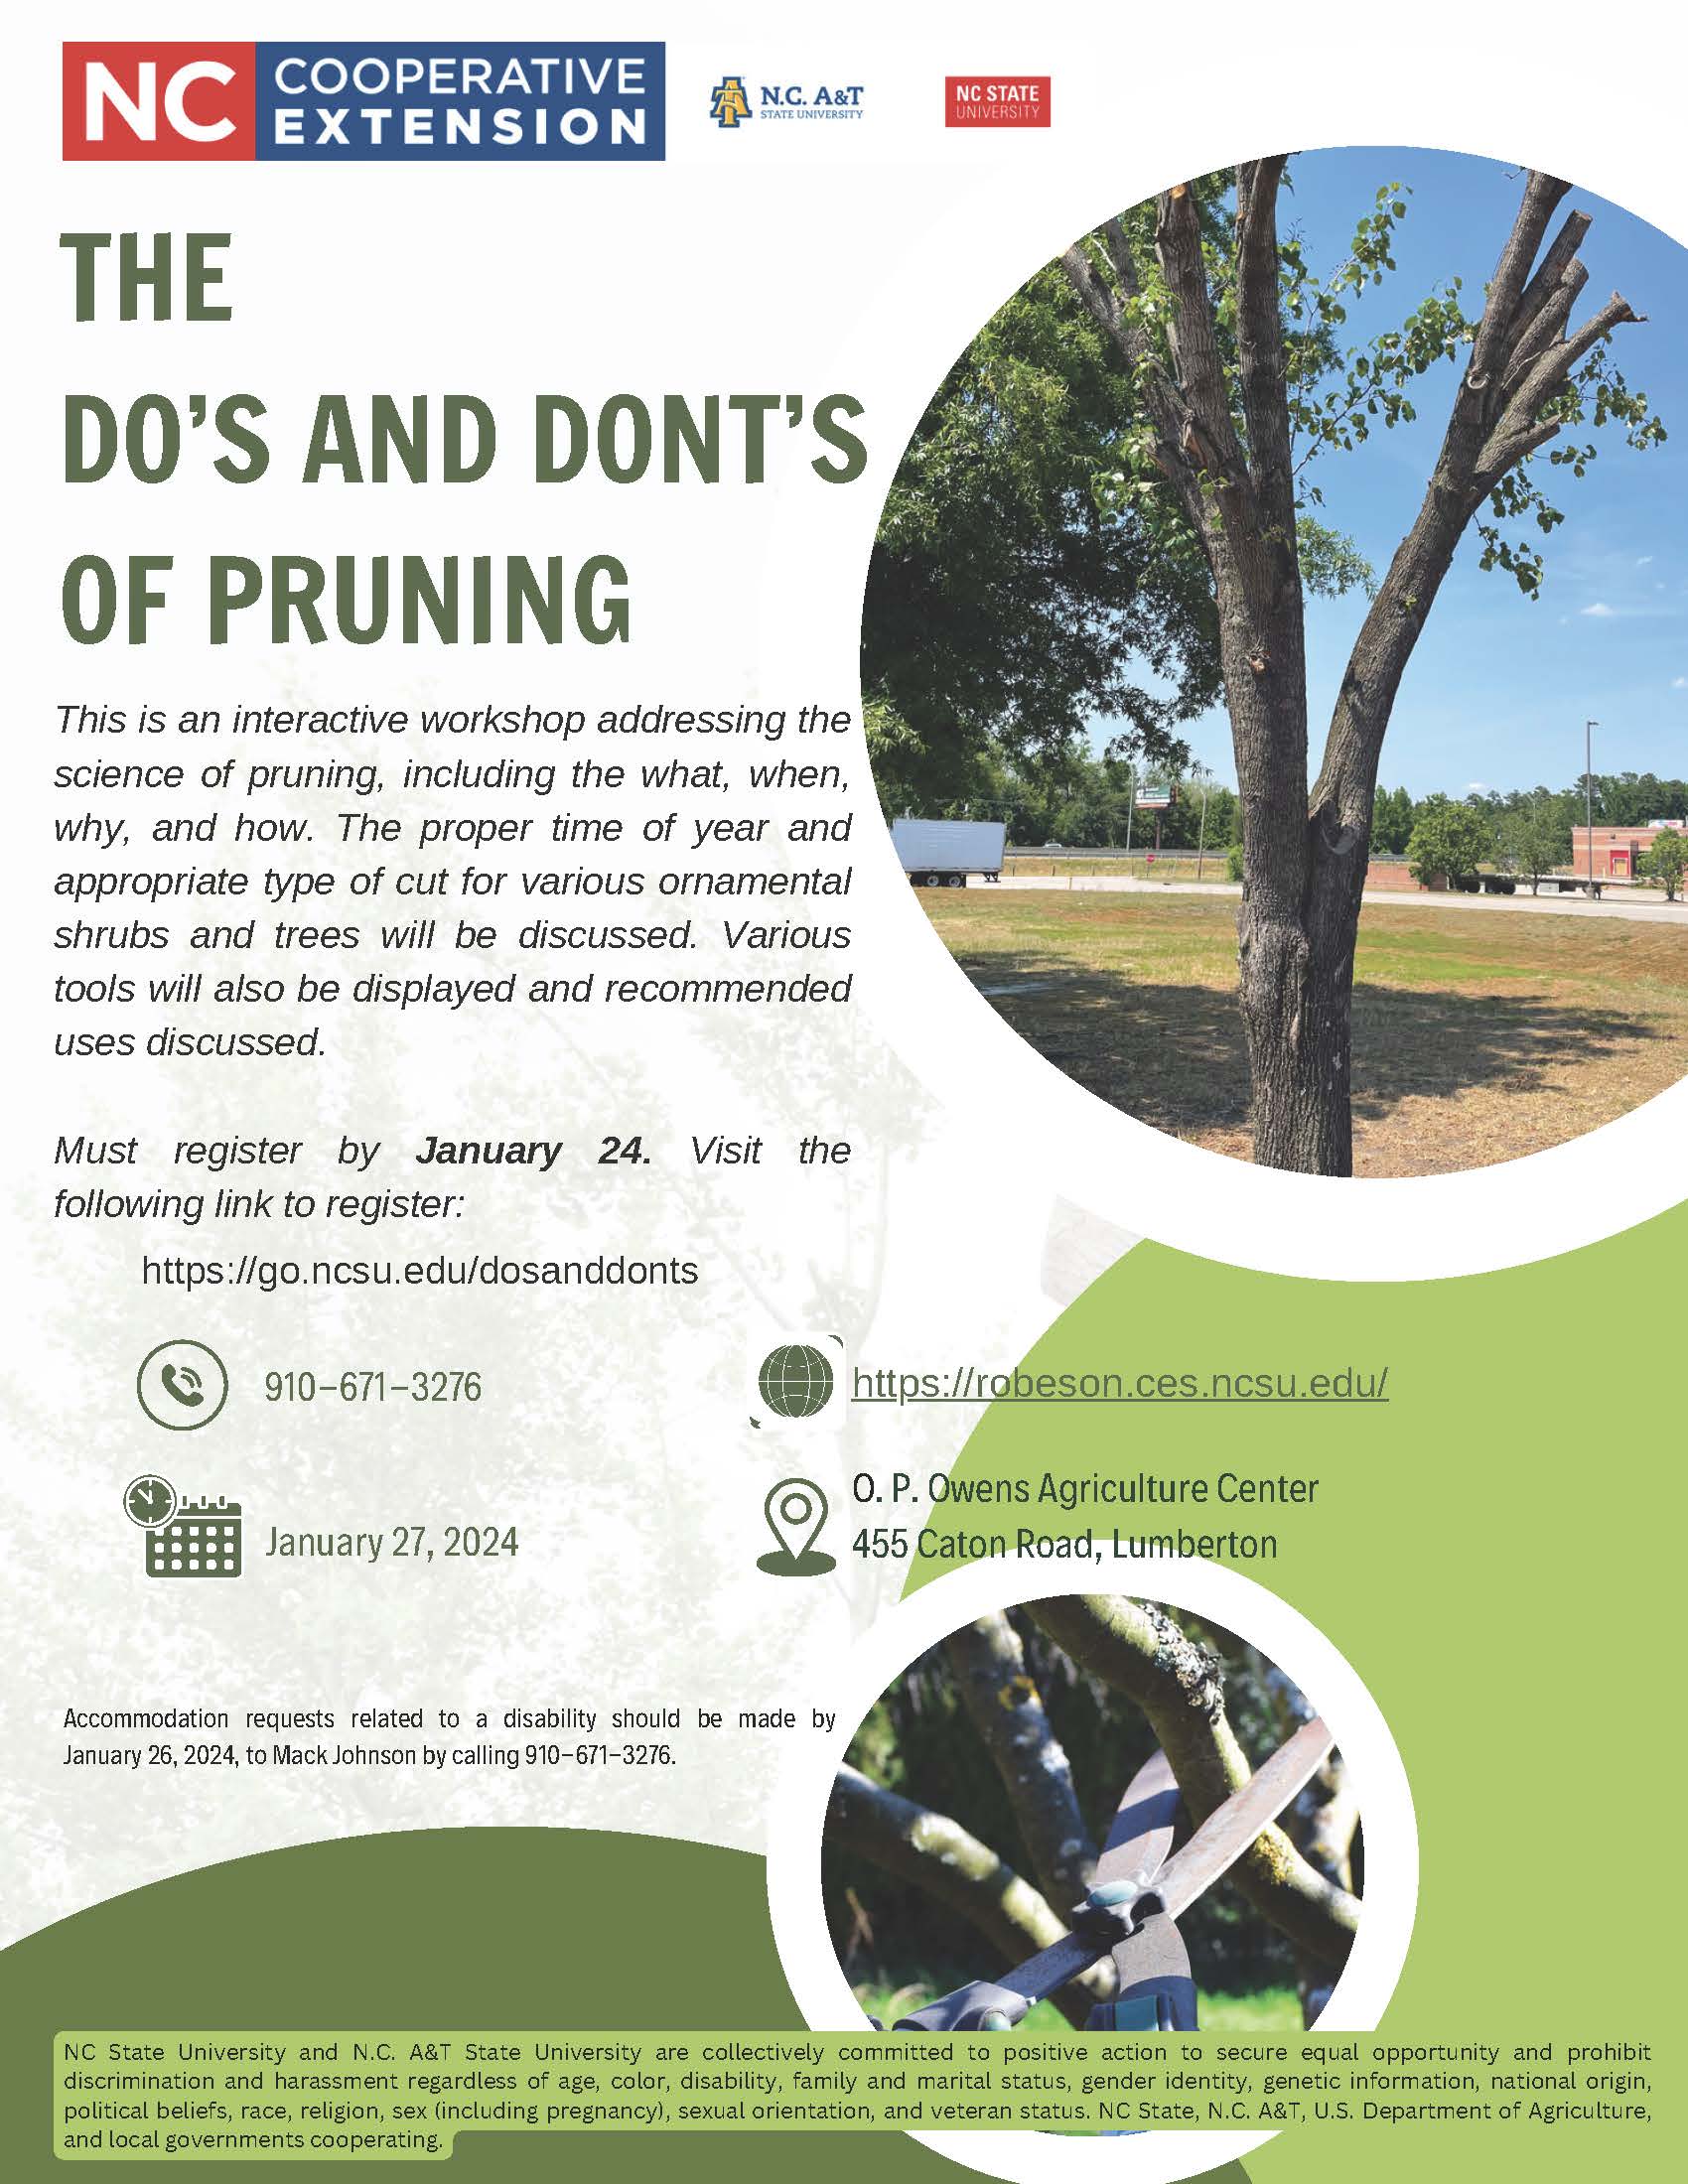 The Do’s and Dont’s of Pruning